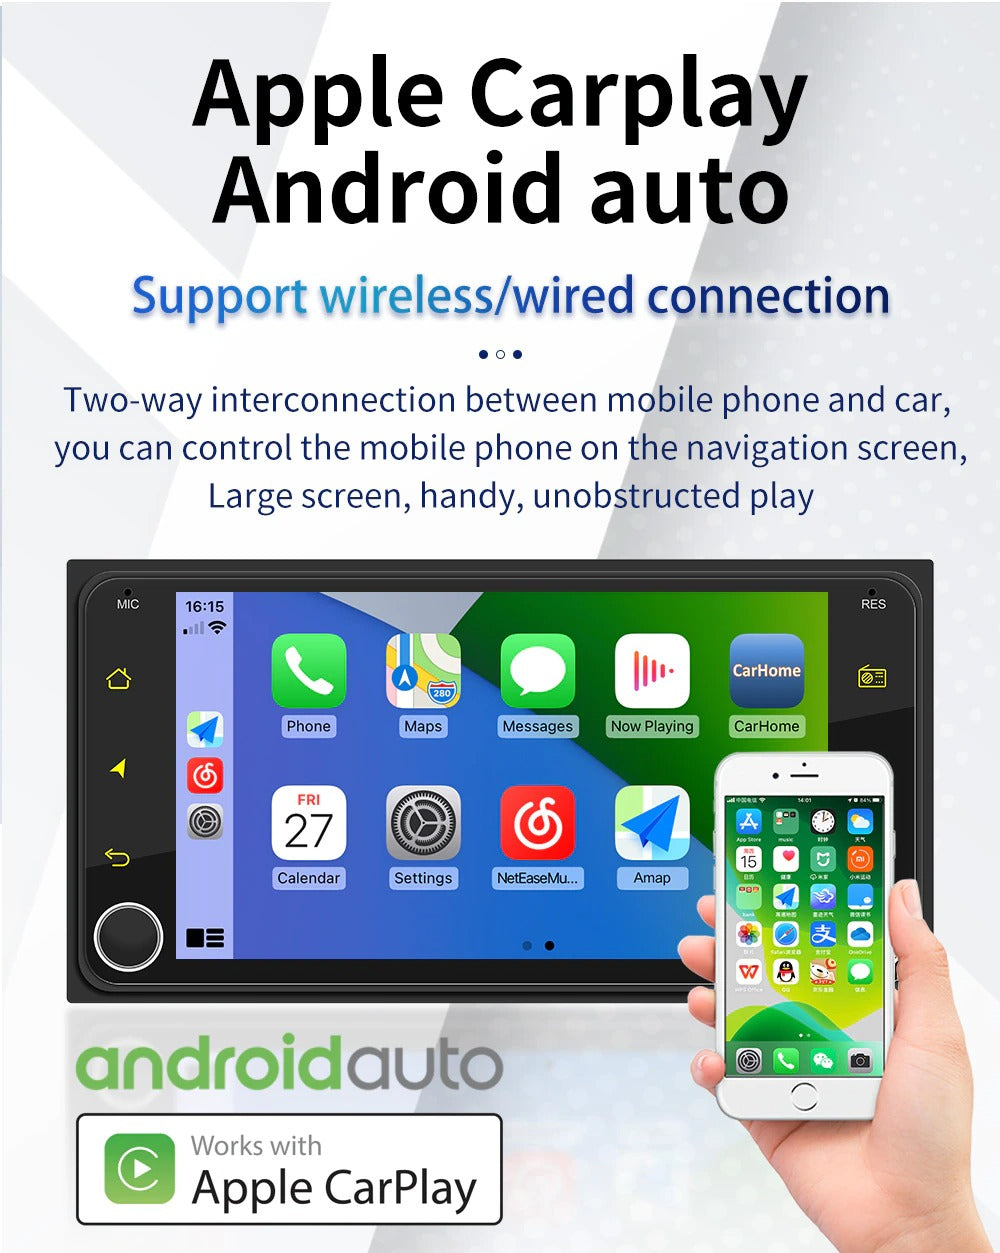 2 + 32G Android Stereo Apple Carplay / Android Auto Suit Toyota Including Rear View Camera GPS Bluetooth Touch screen